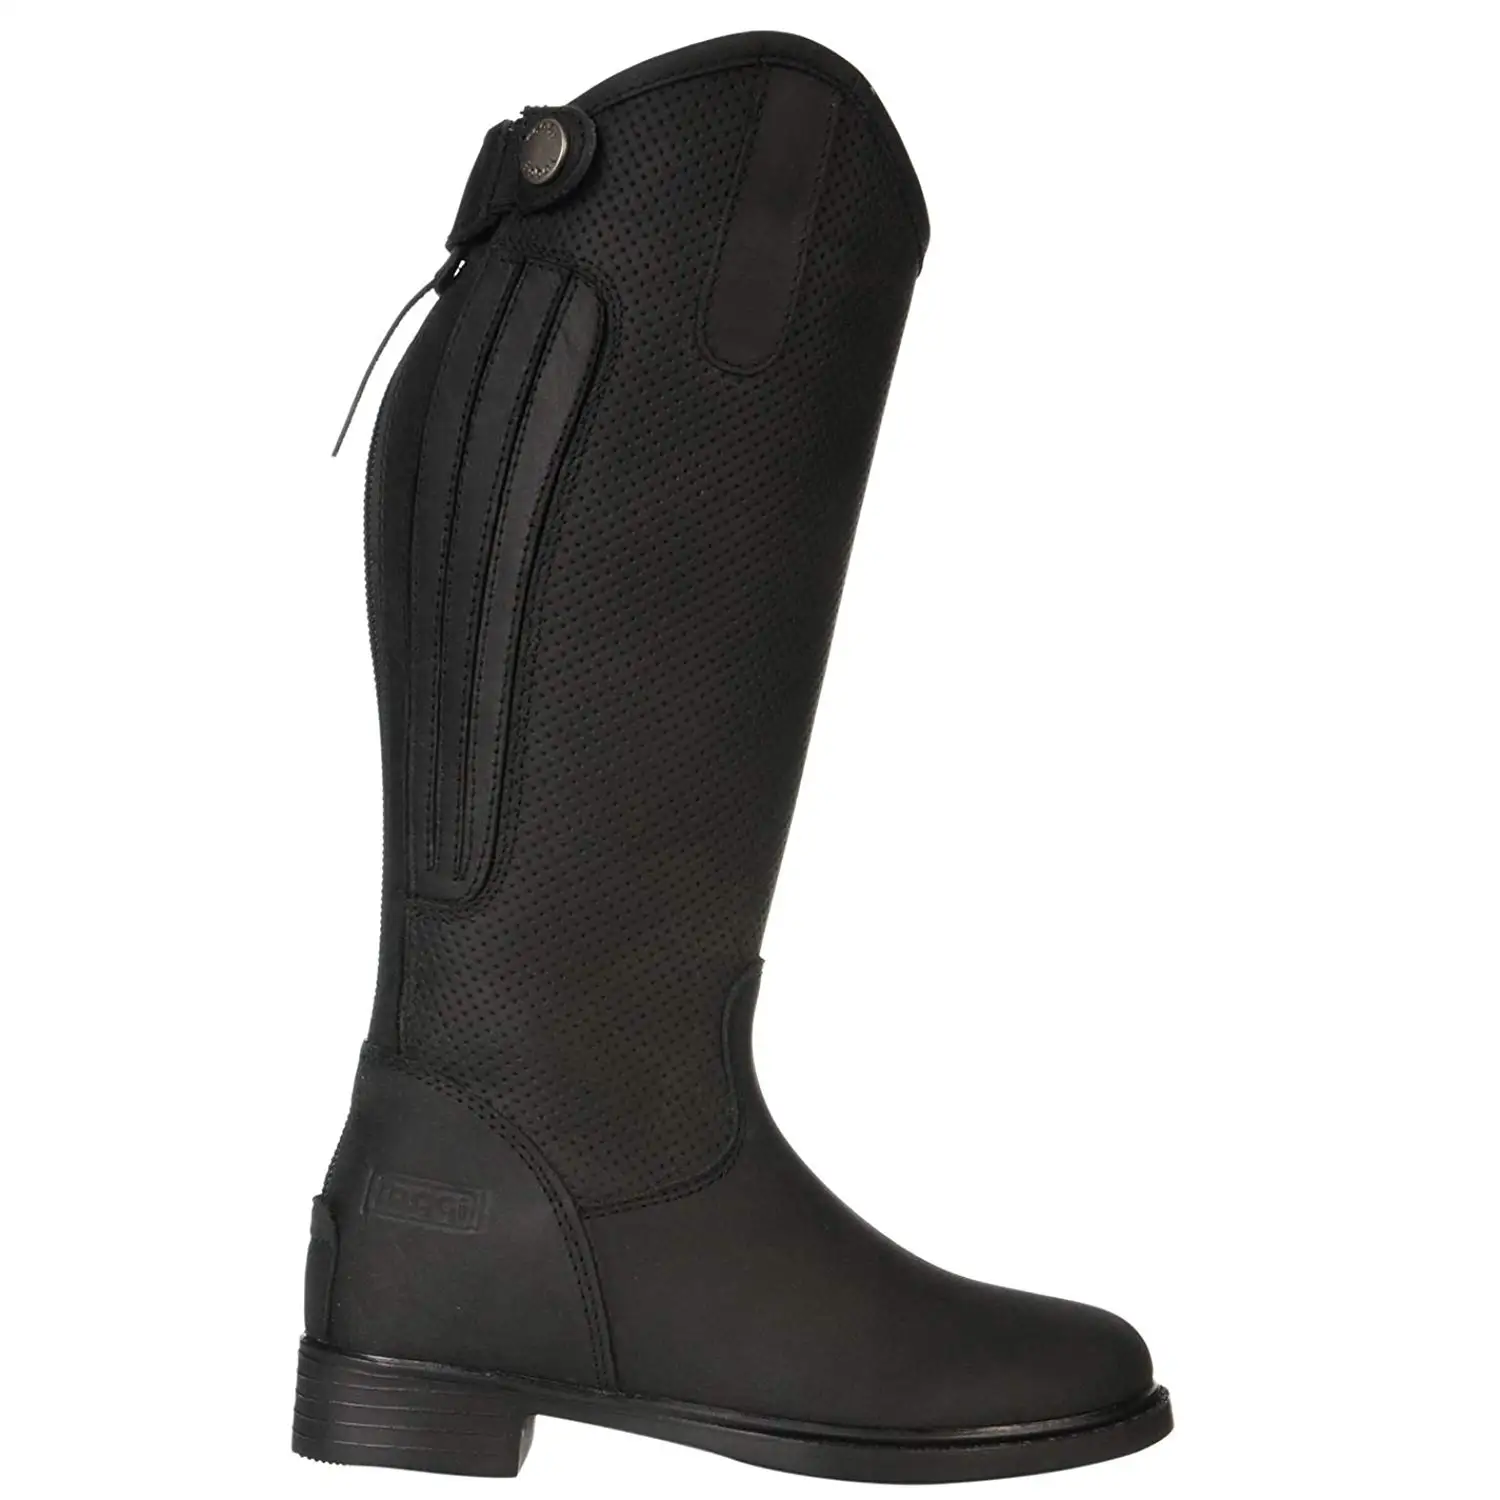 Wide Leg Fitting EU 40 Toggi Calgary Long Leather Riding Boot With Full Zip In Cheeco Brown Size: 6.5